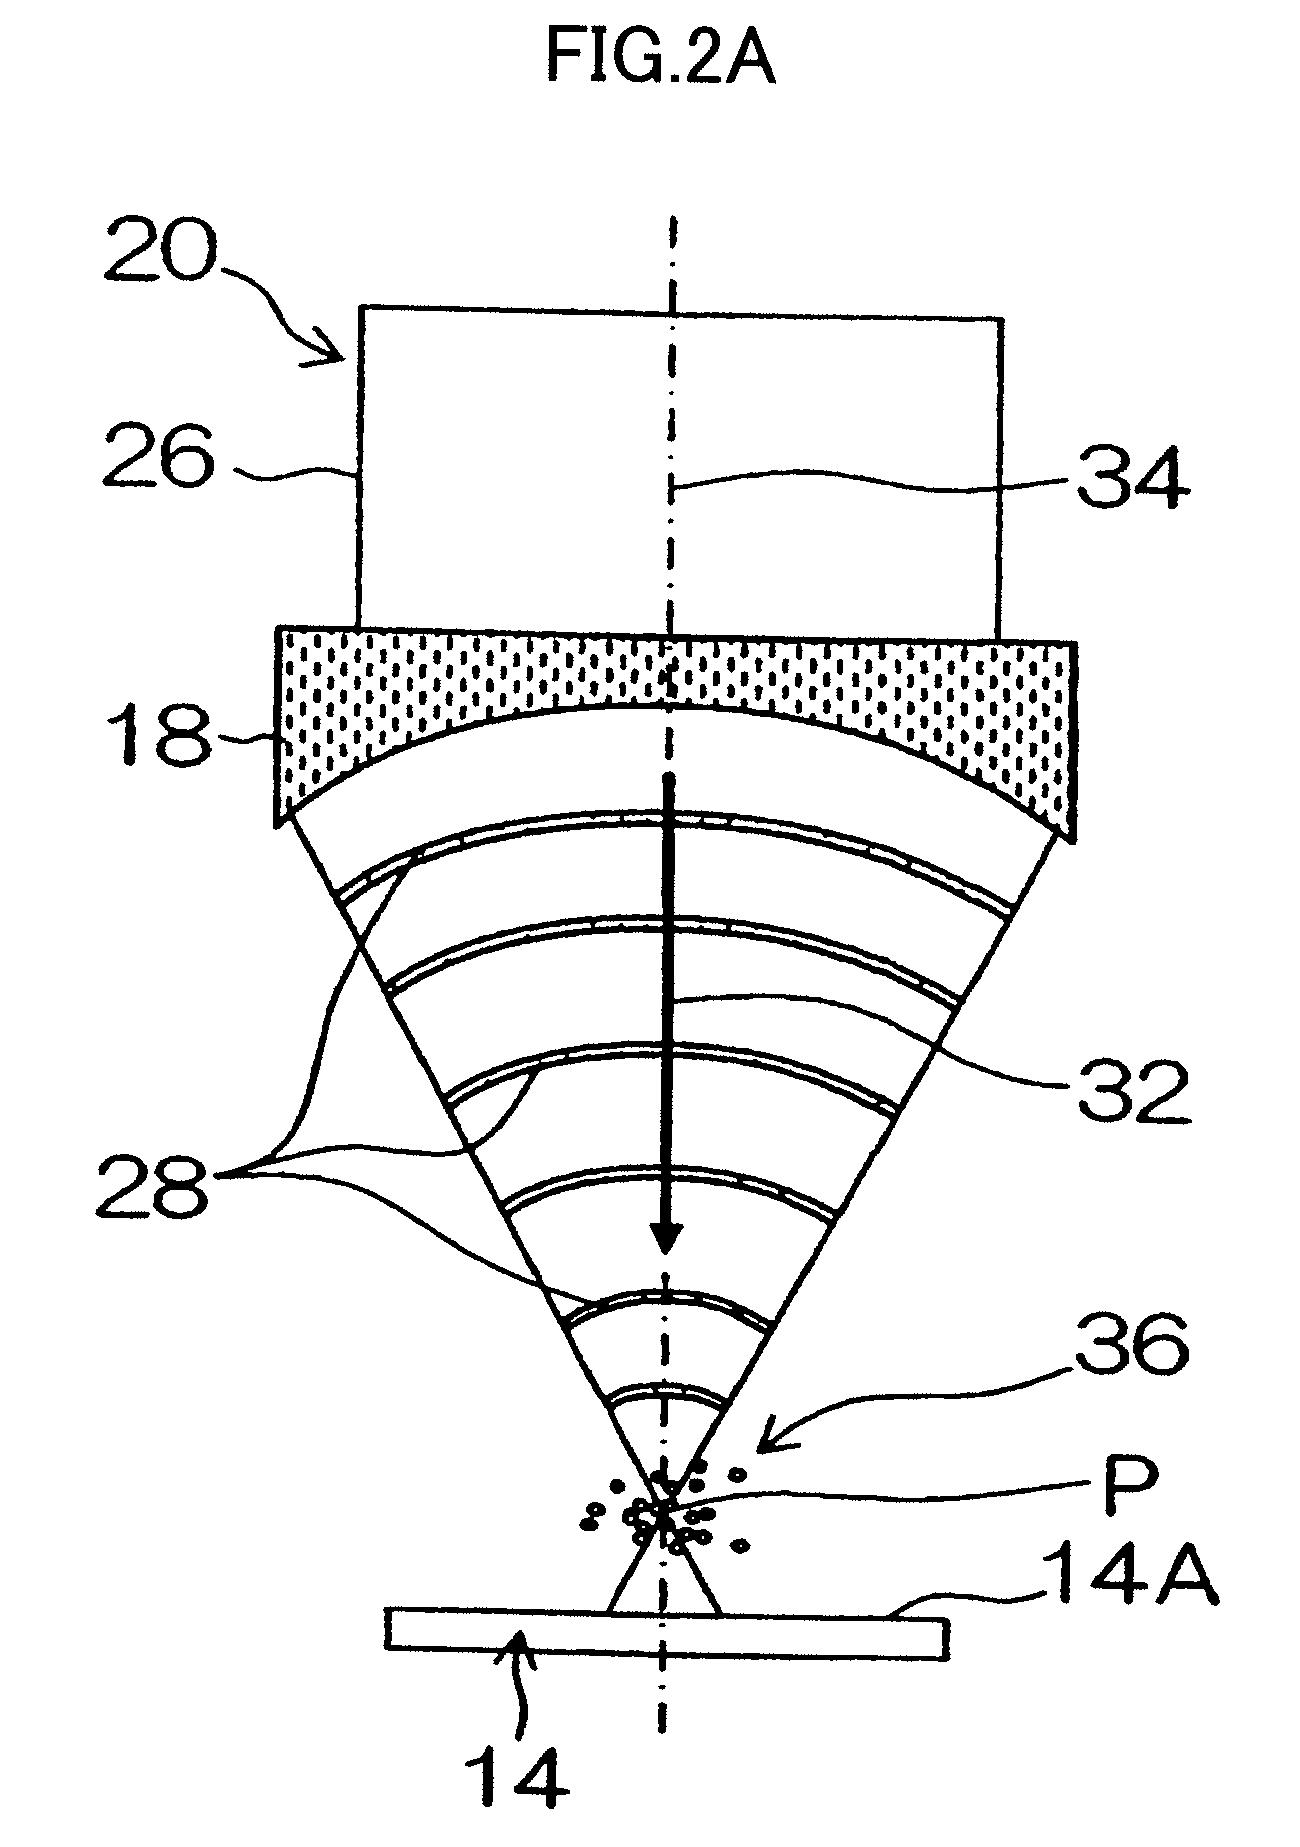 Ultrasonic cleaning apparatus